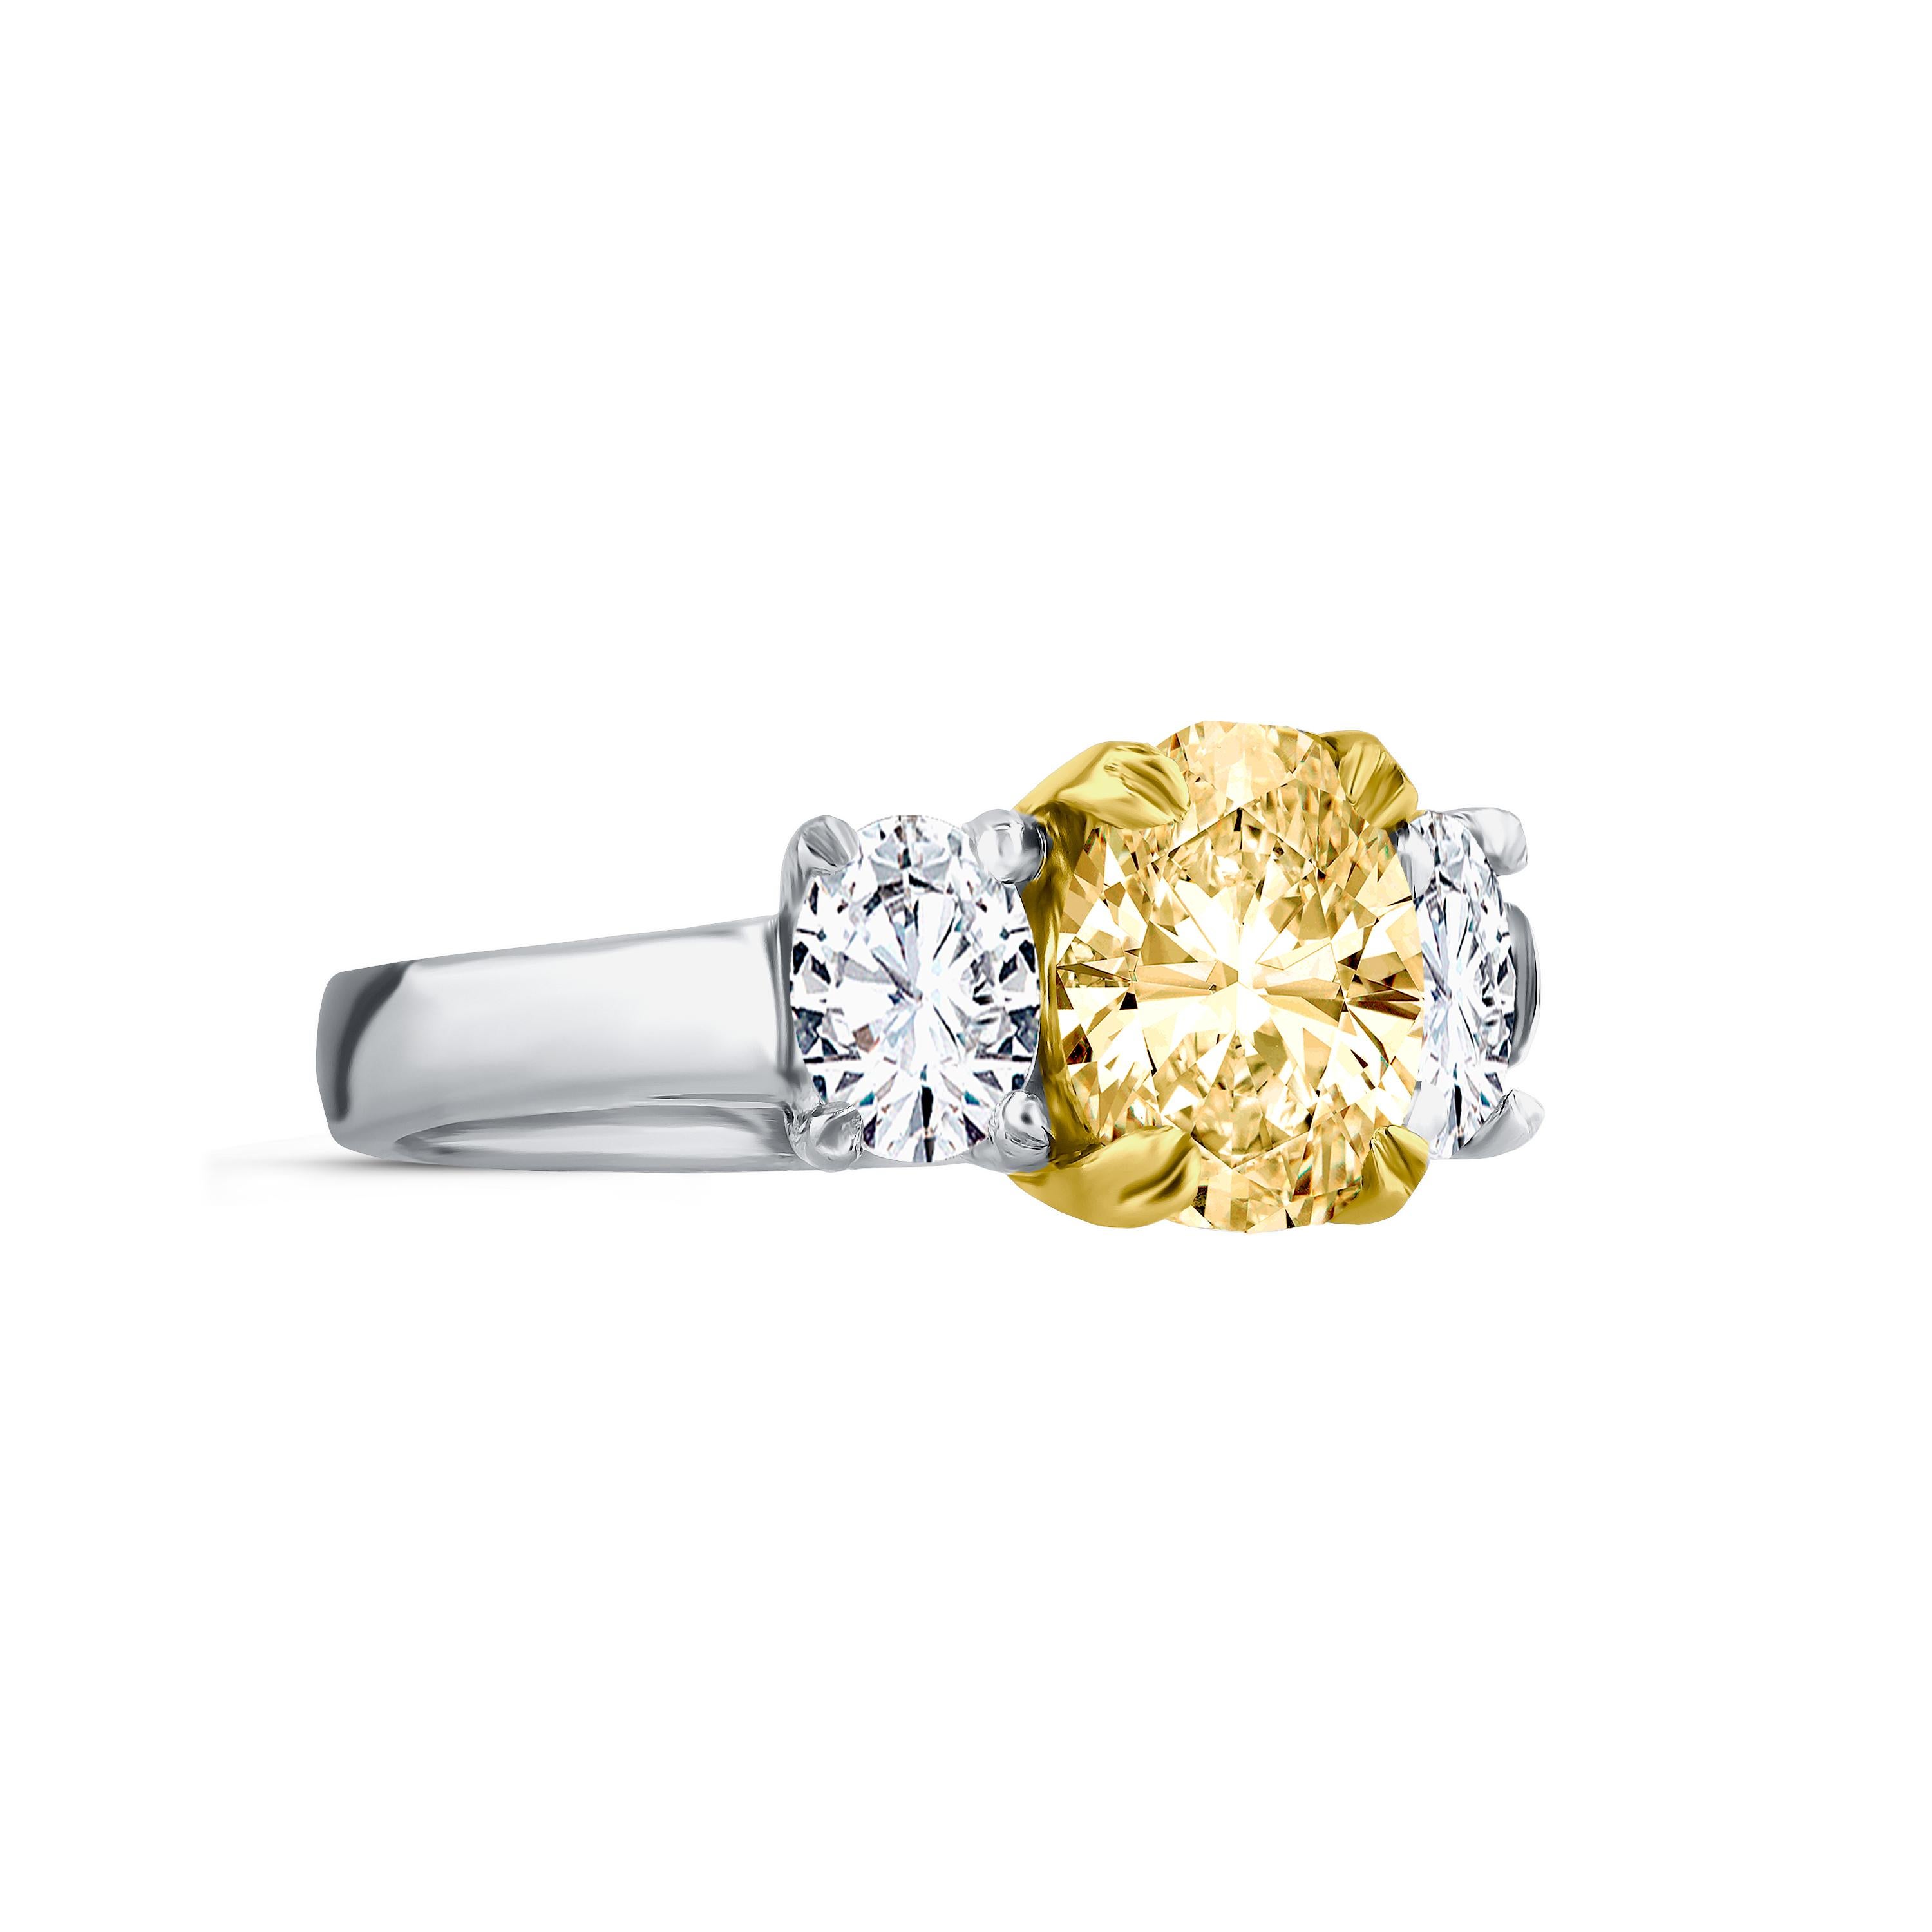 GIA Certified 2.01 Carat Natural Fancy Intense Yellow Diamond Ring ref124 For Sale 5